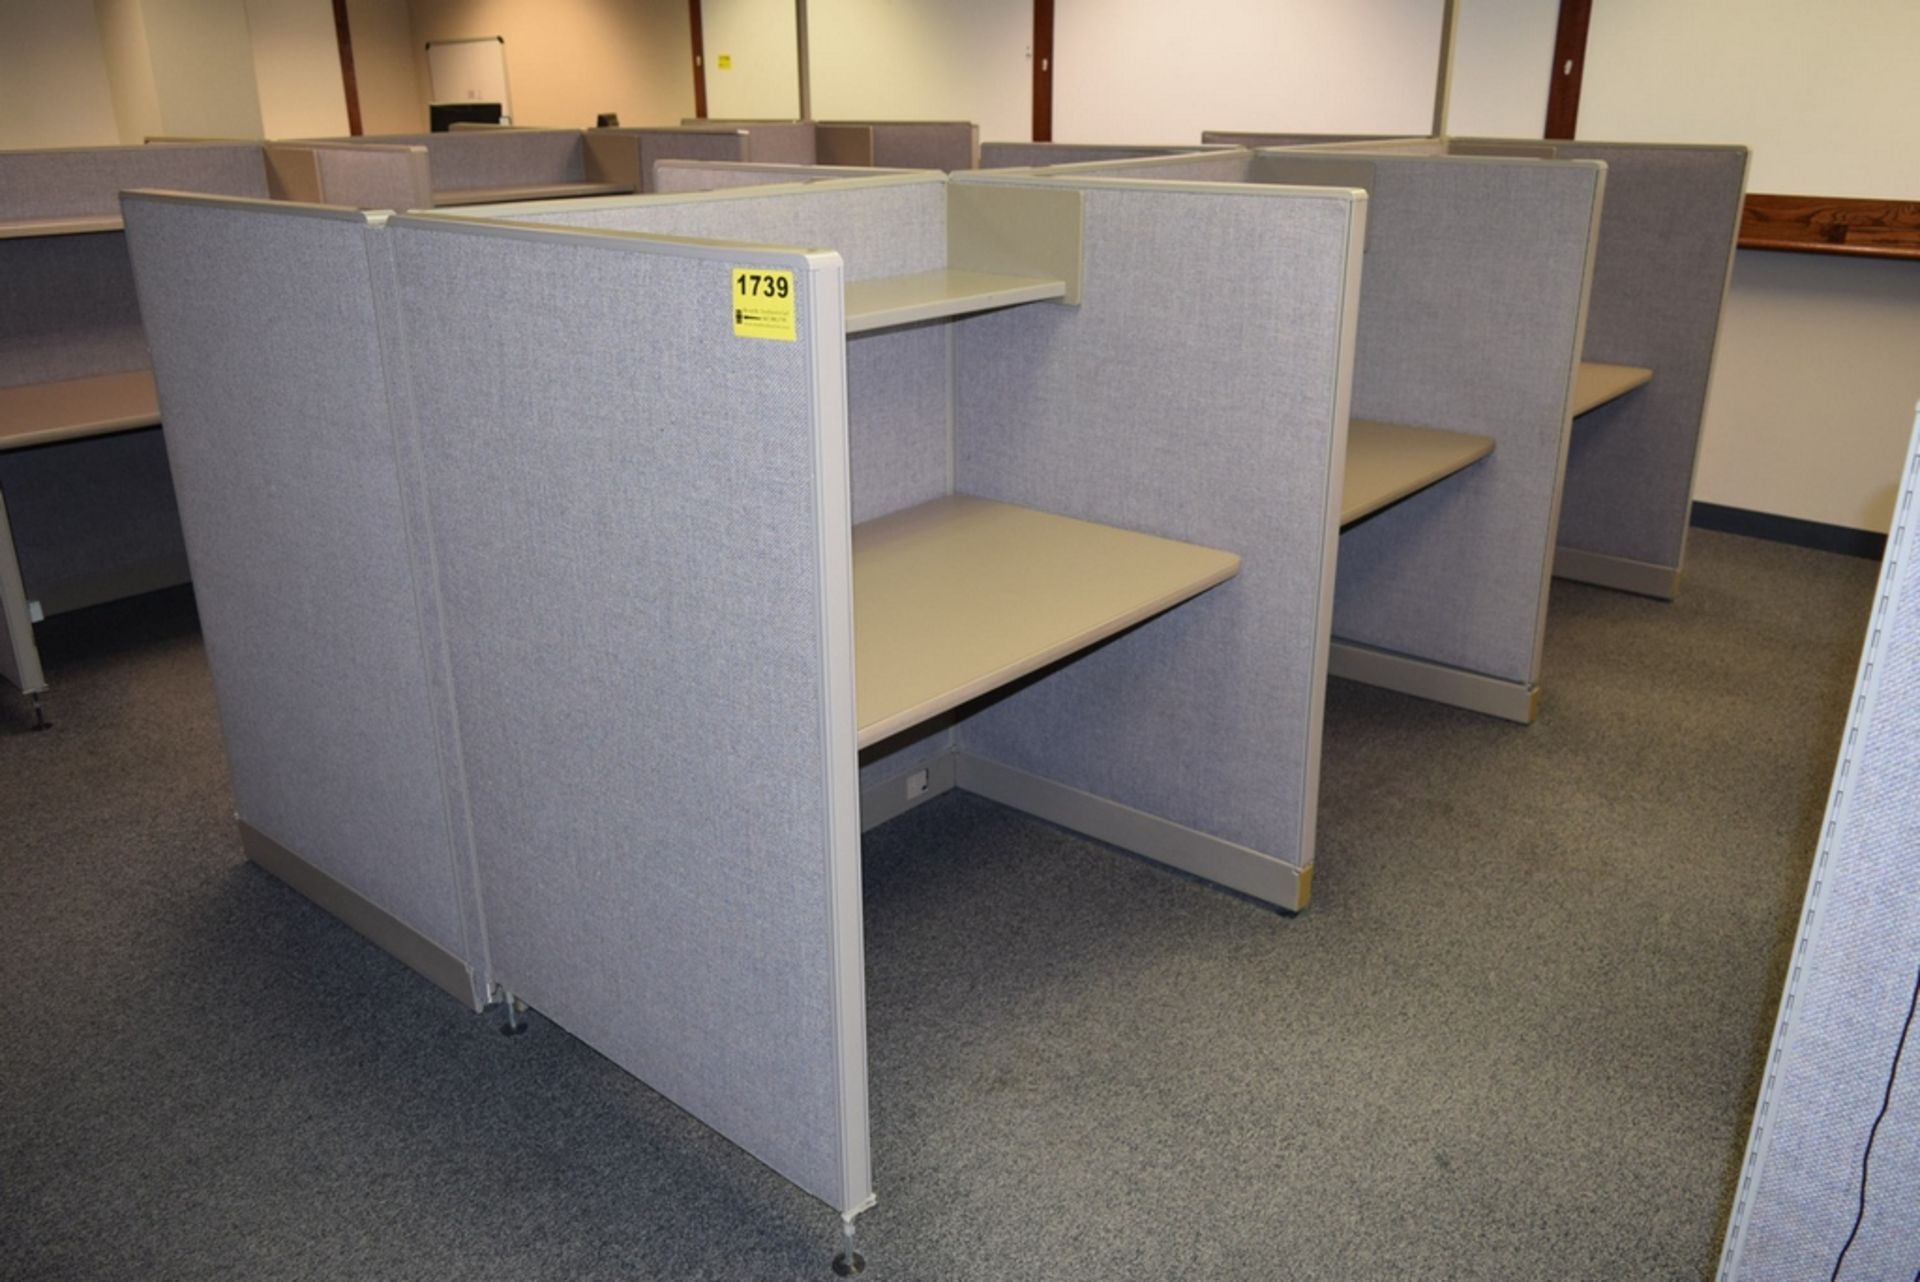 (6) SECTIONS OF 48"X36"X56" METAL FRAME CLOTH UPHOLSTERED OFFICE CUBICLES W/ADJUSTABLE WOOD LAMINATE